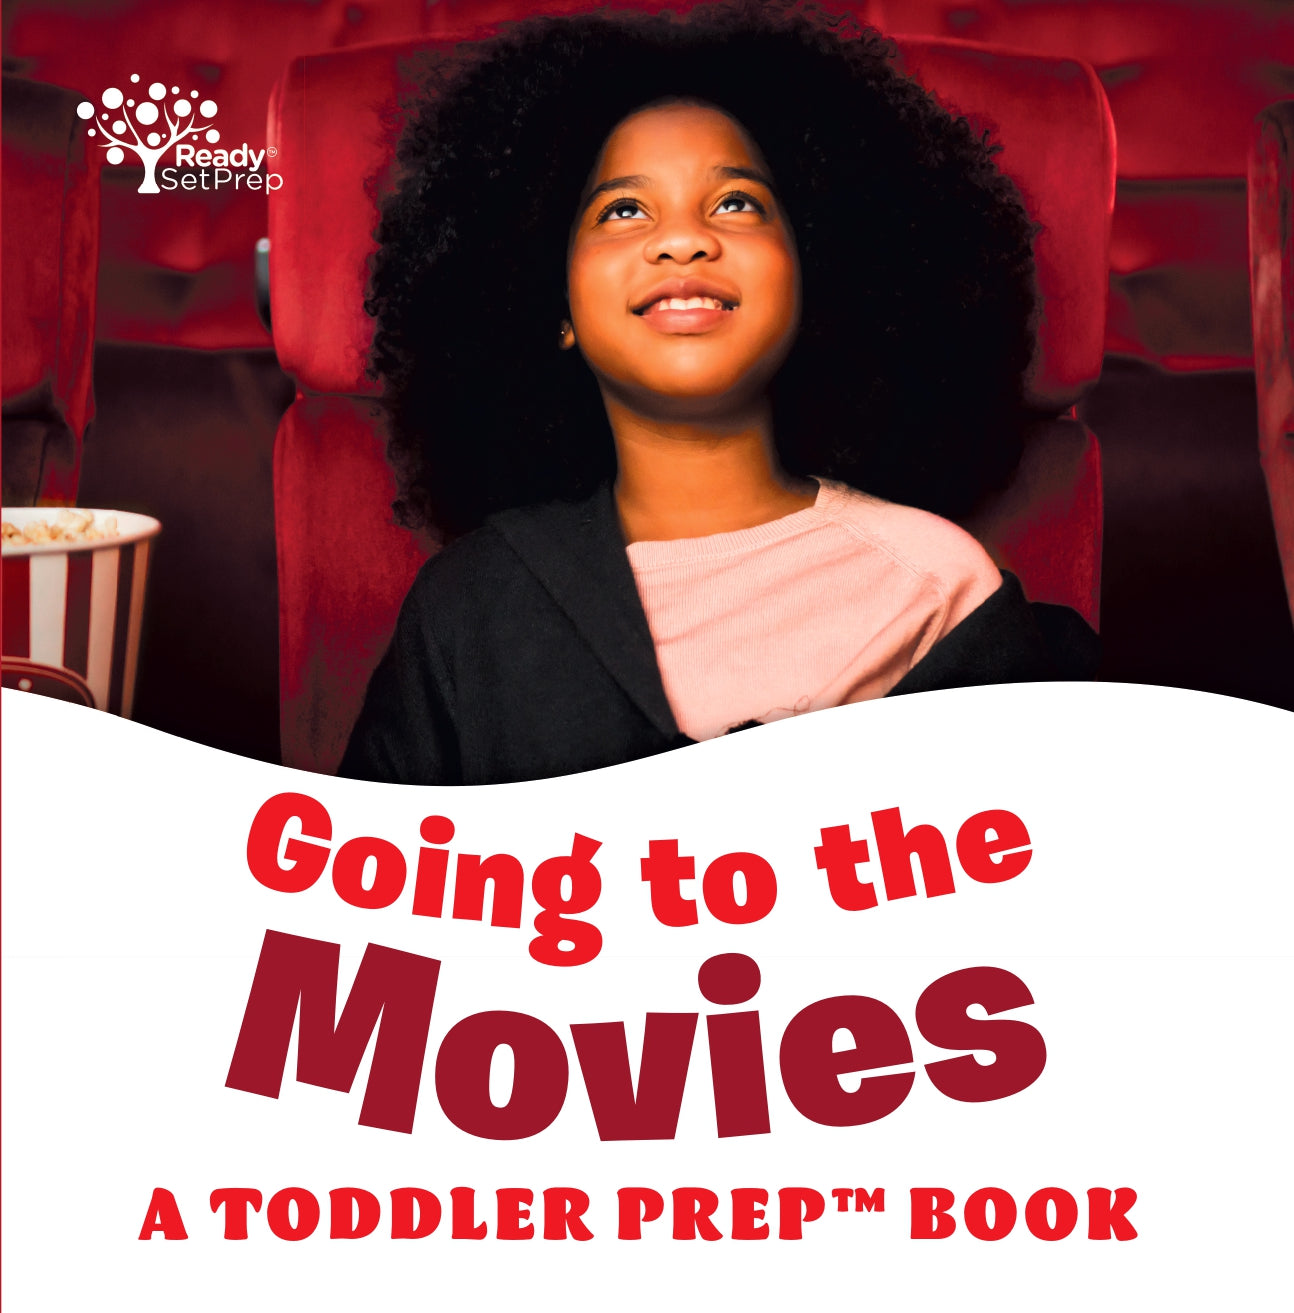 Going to the Movies: A Toddler Prep Book